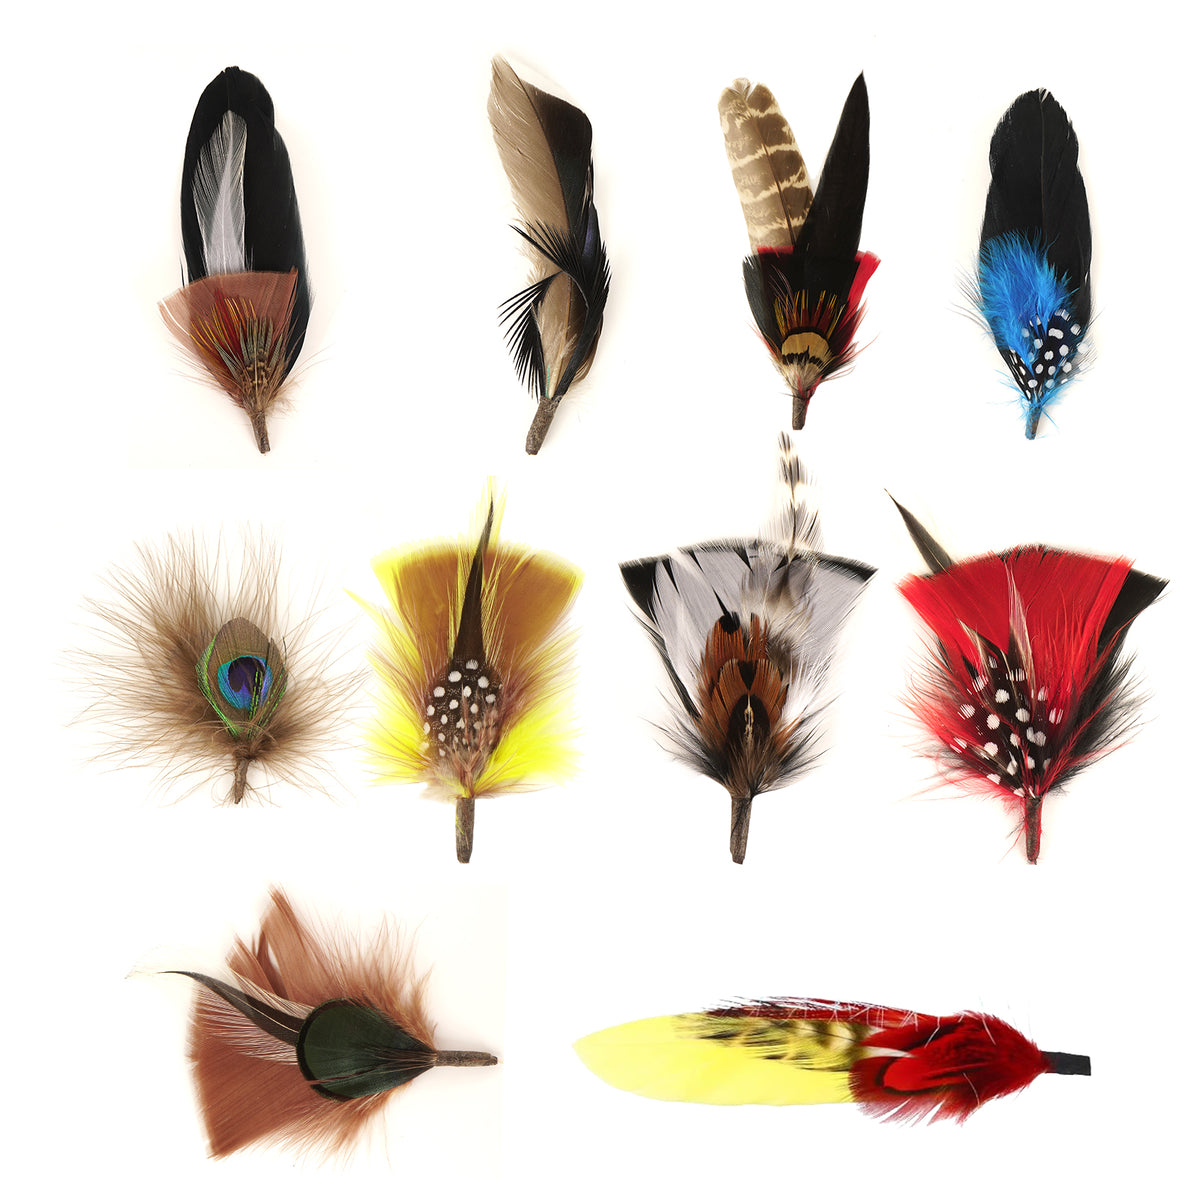 Adorila 10 Pack Hat Feathers, Small Feathers for Cowboy Hats, Colorful Natural Feathers for DIY Craft Accessories Decorations